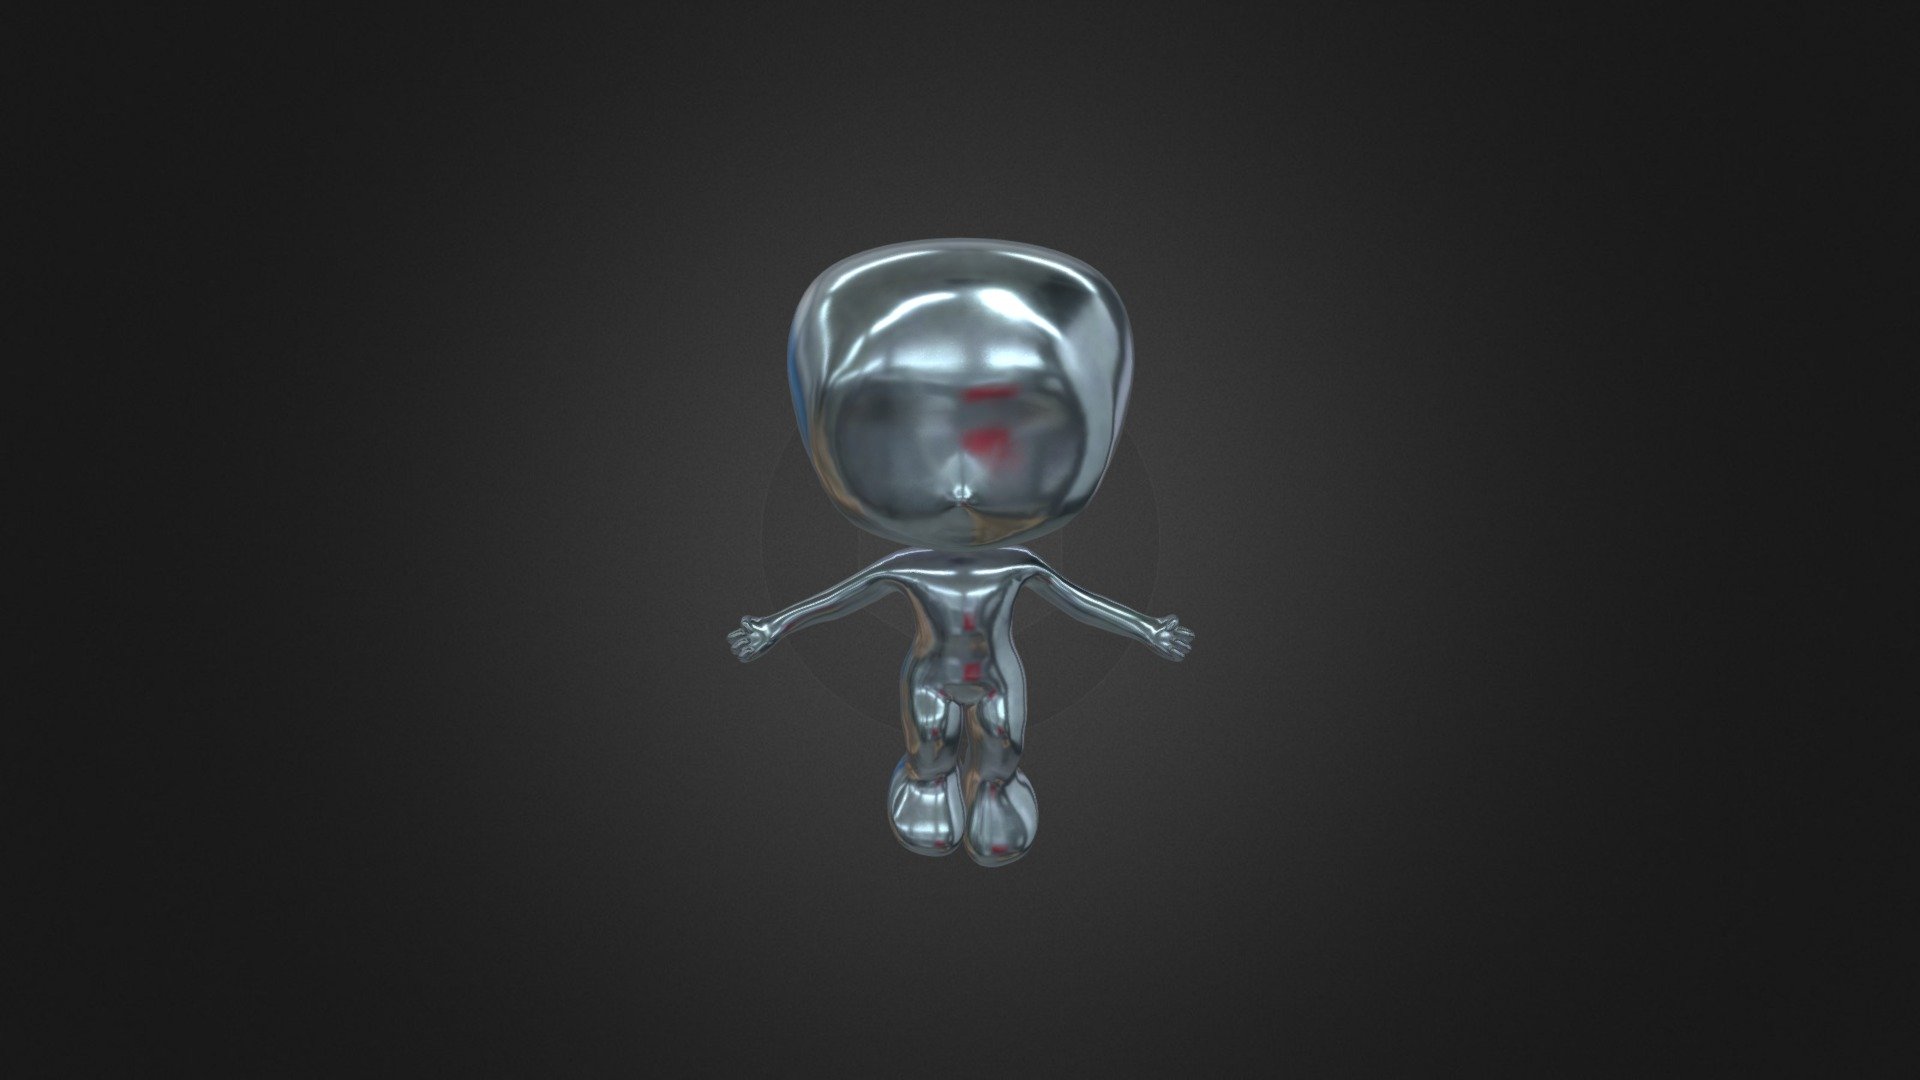 OD1 MINI CHARACTER ZERO

Great for Super Hero type mini Characters, Ready for texture painting and animation. Made in Blender. This version reminds me of the Sliver Sufer 3d model